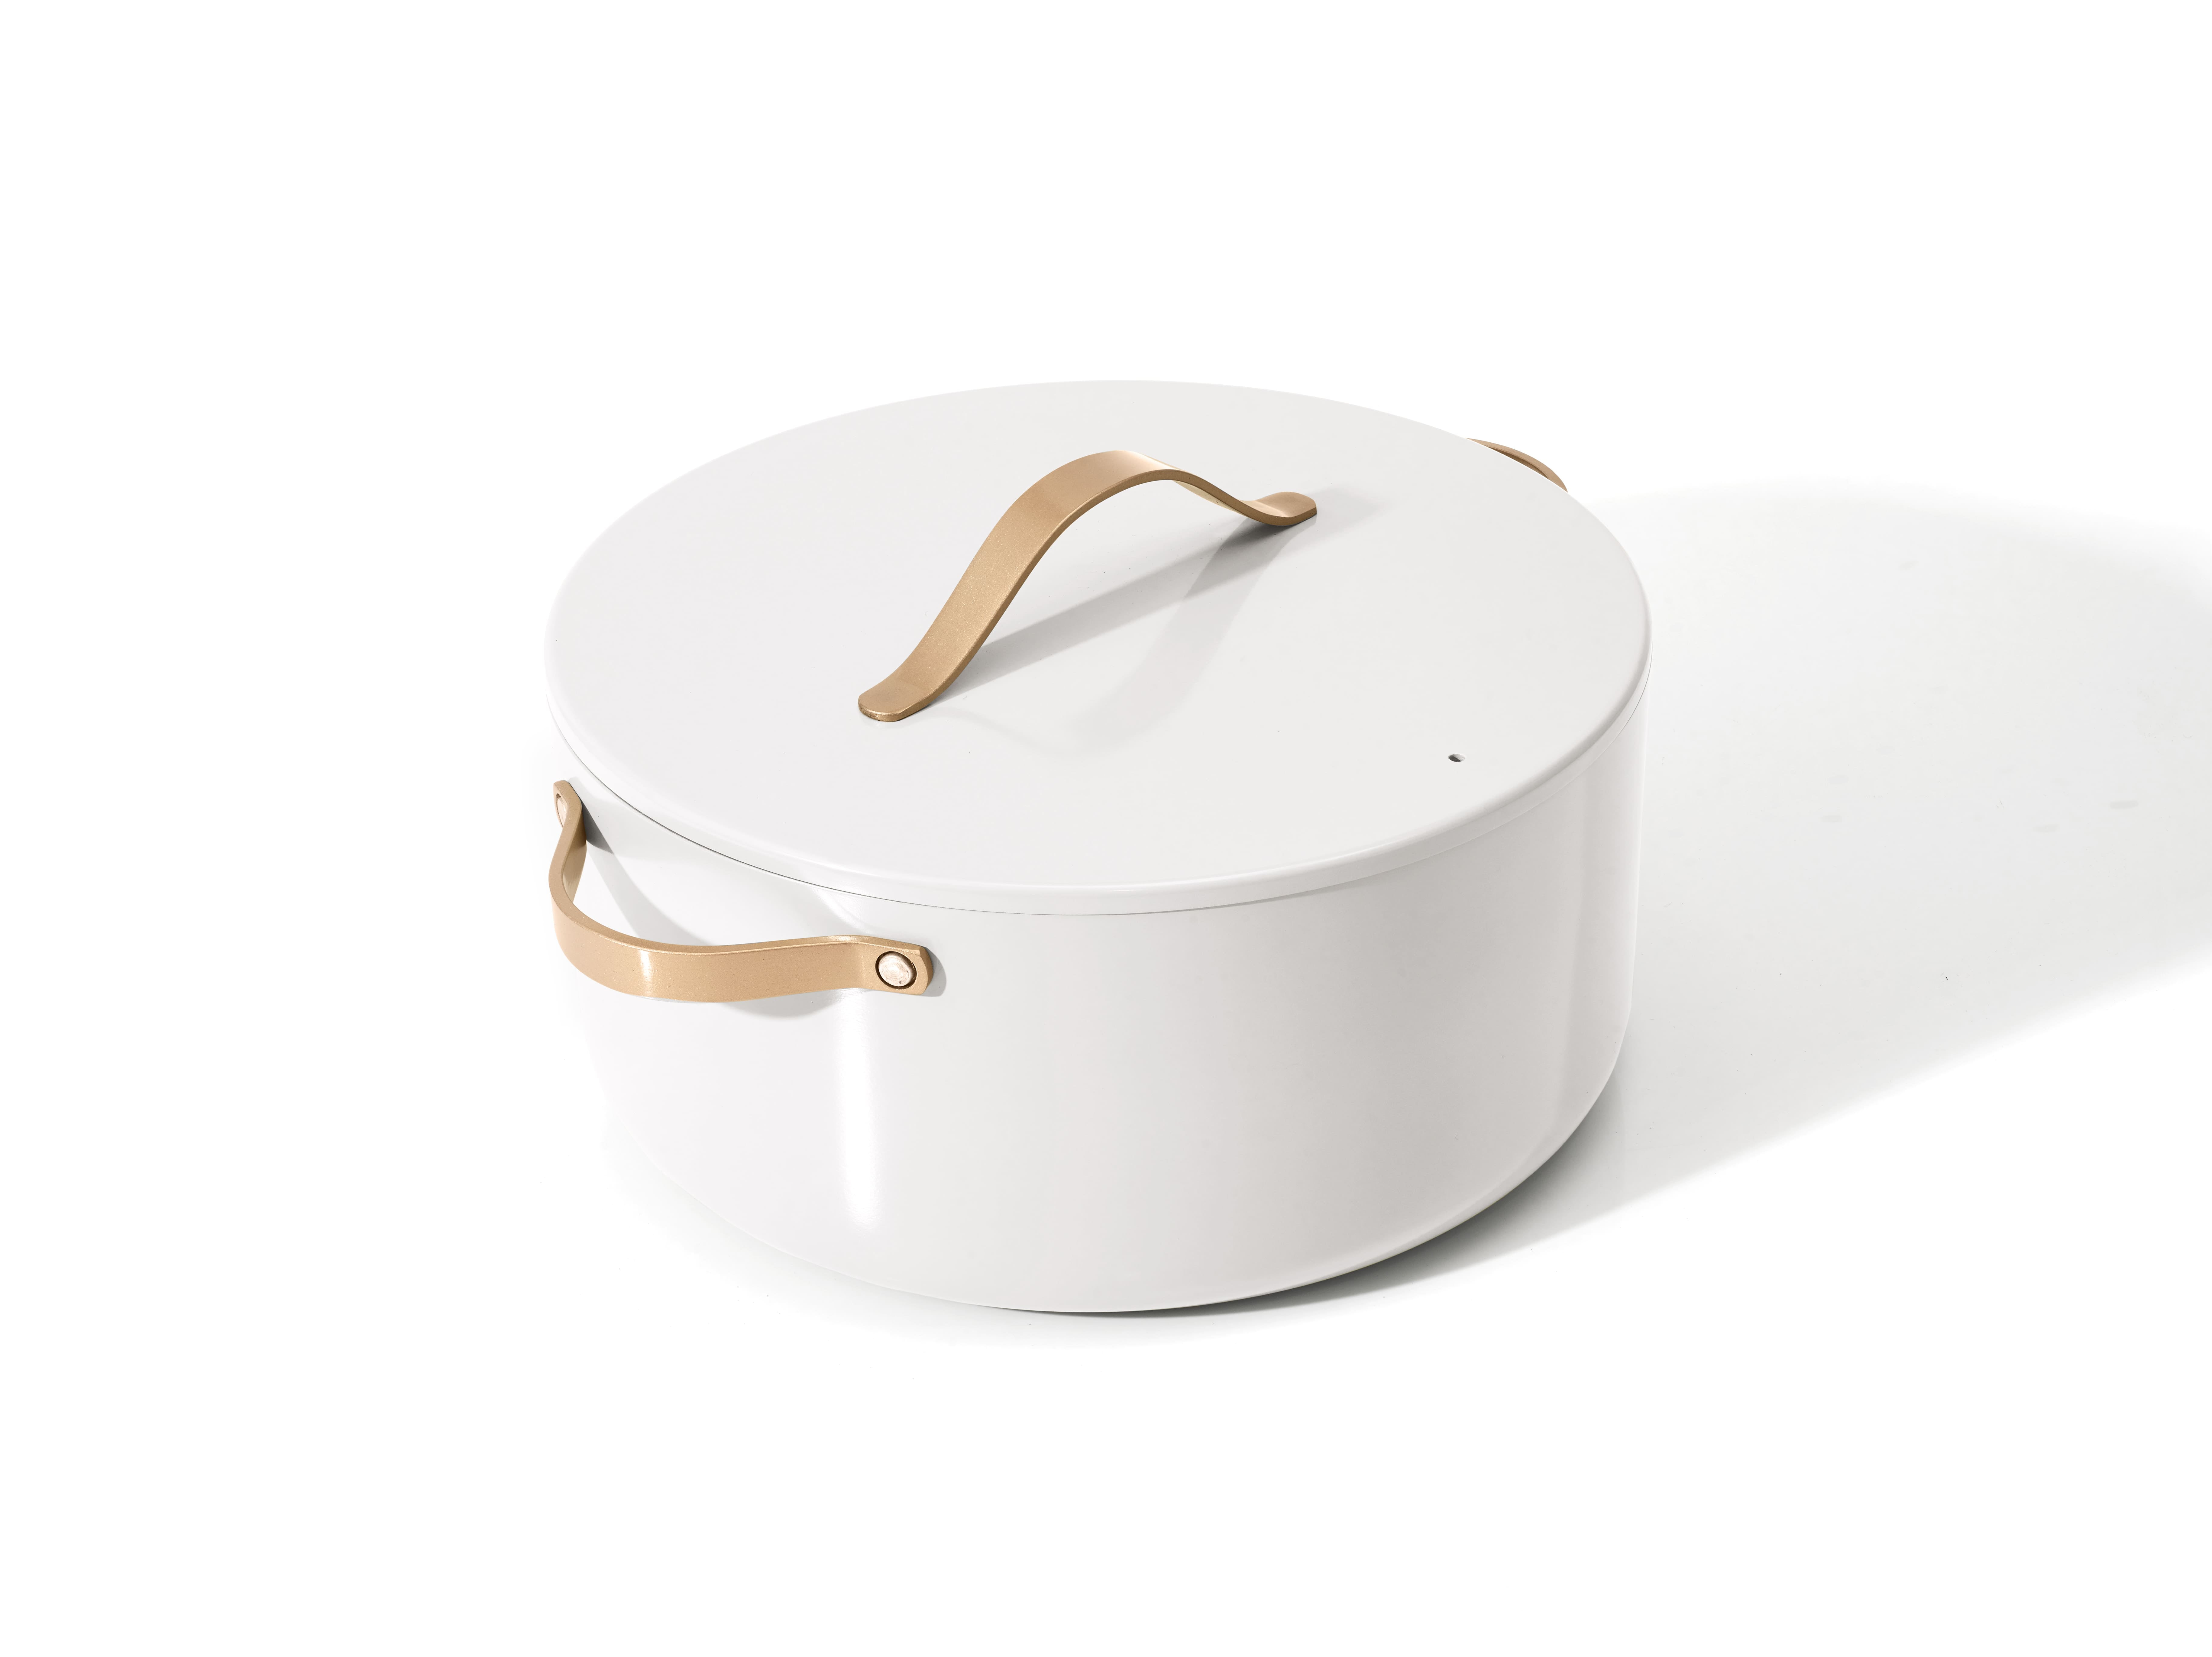 Beautiful 5 Quart Dutch Oven, White Icing by Drew Barrymore